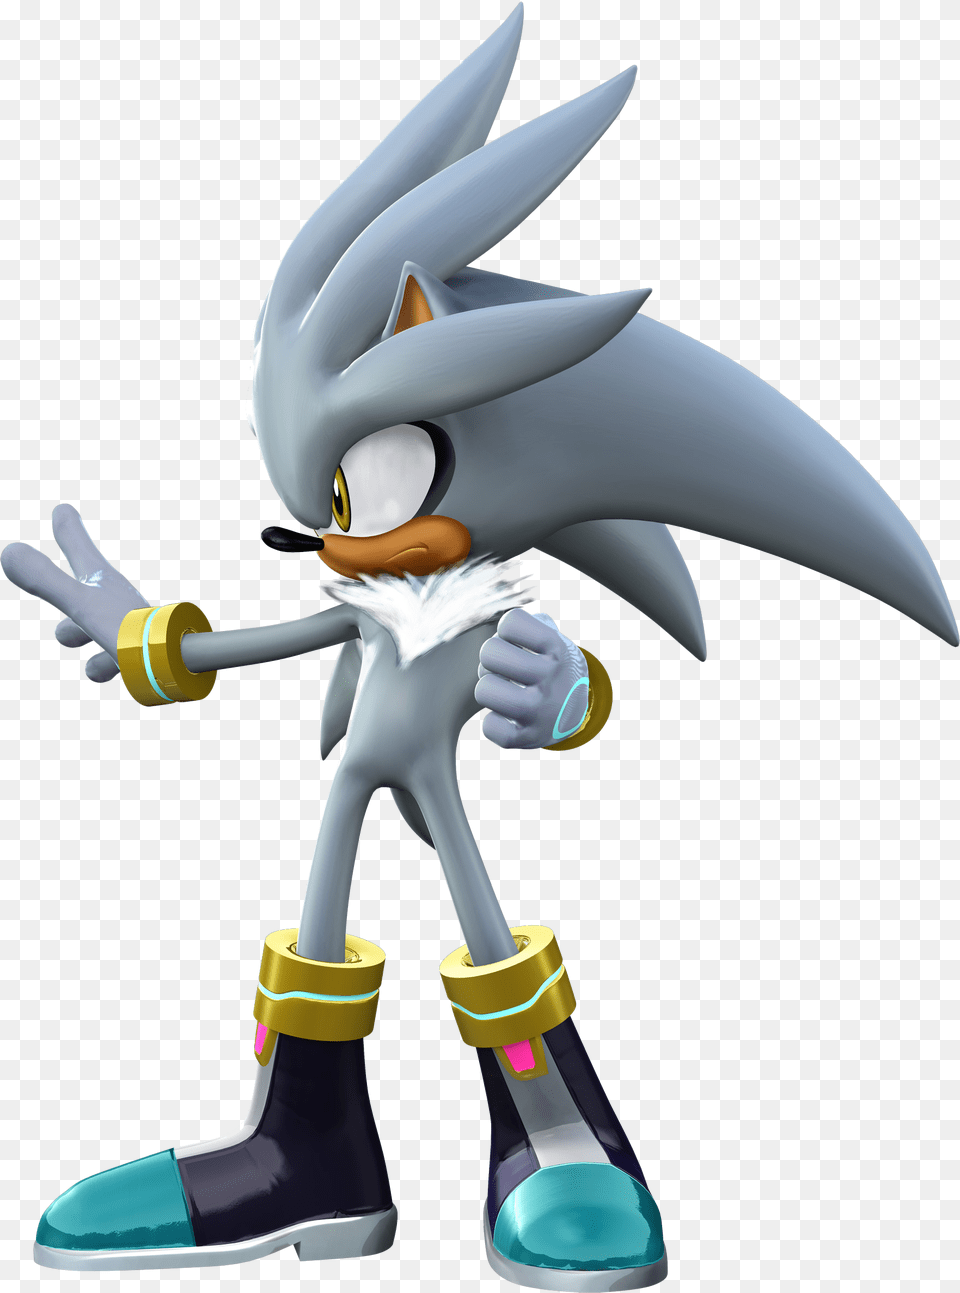 Silver The Hedgehog Shoes, Figurine, Clothing, Glove, Aircraft Free Png Download